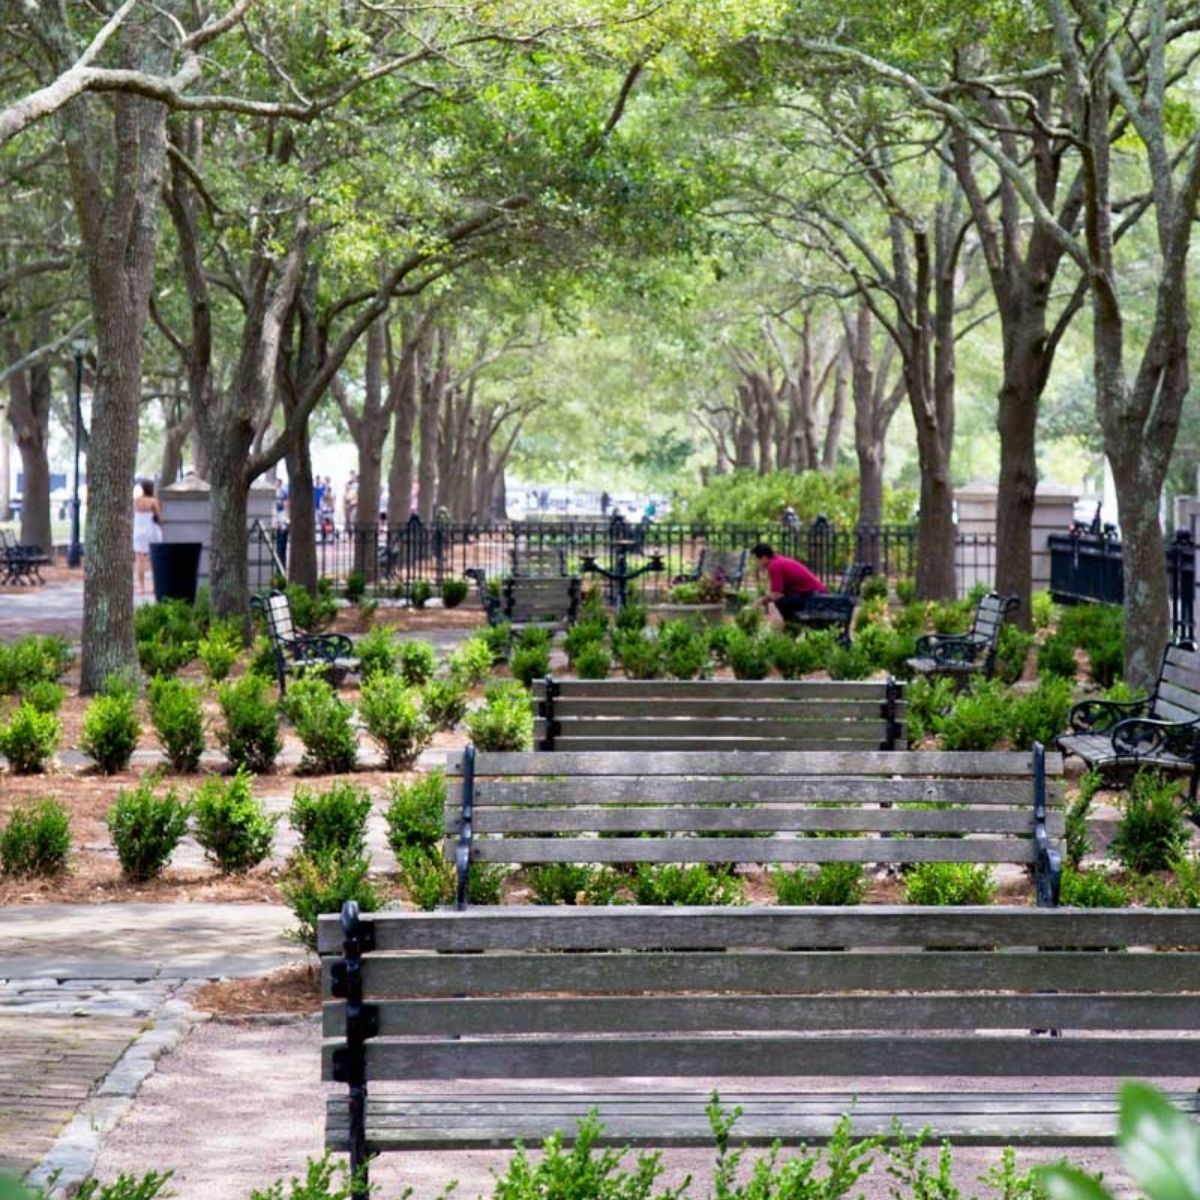 Park benches and shady trees in a green space in downtown Charleston.